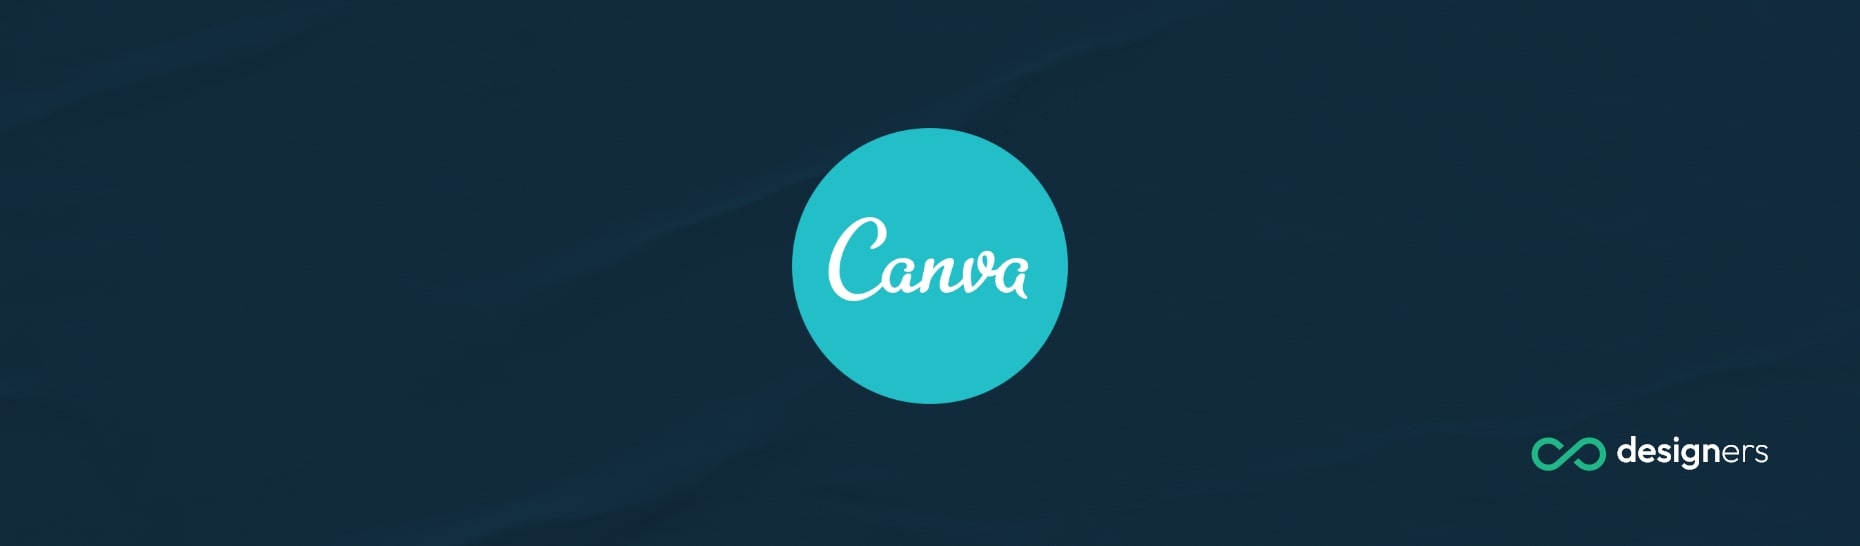 Is Canva Going to IPO?